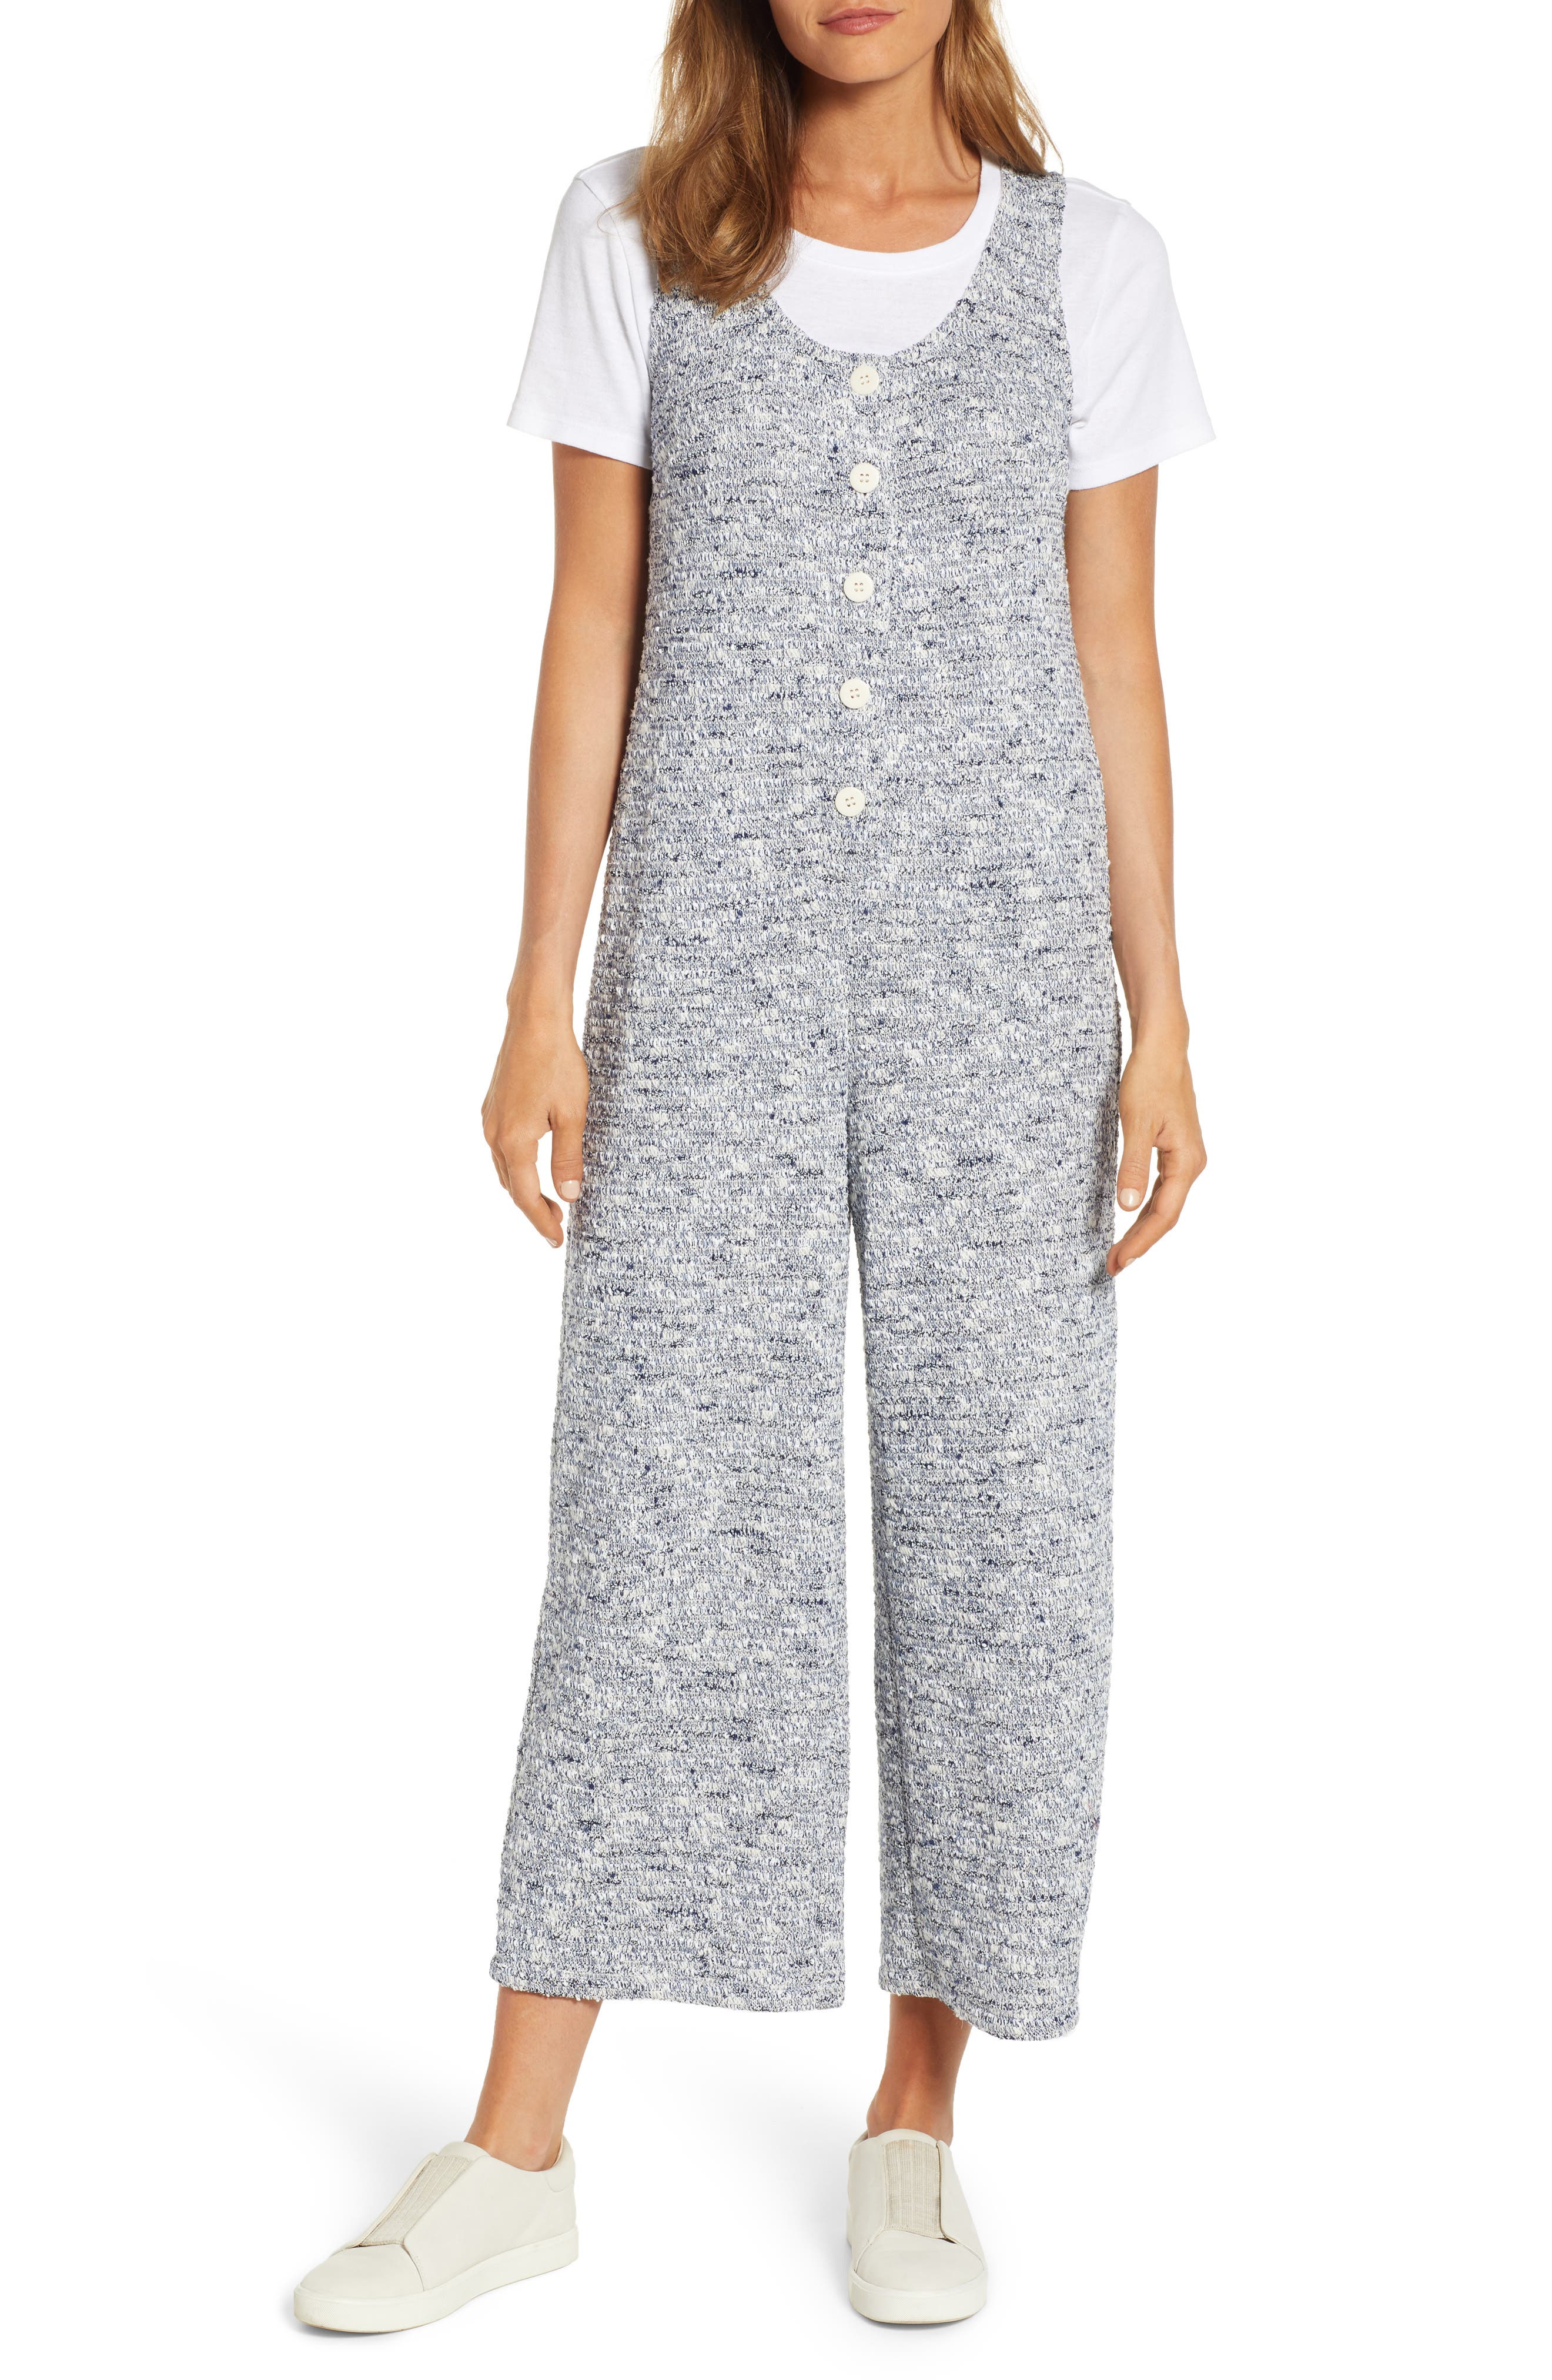 lou and grey jumpsuit